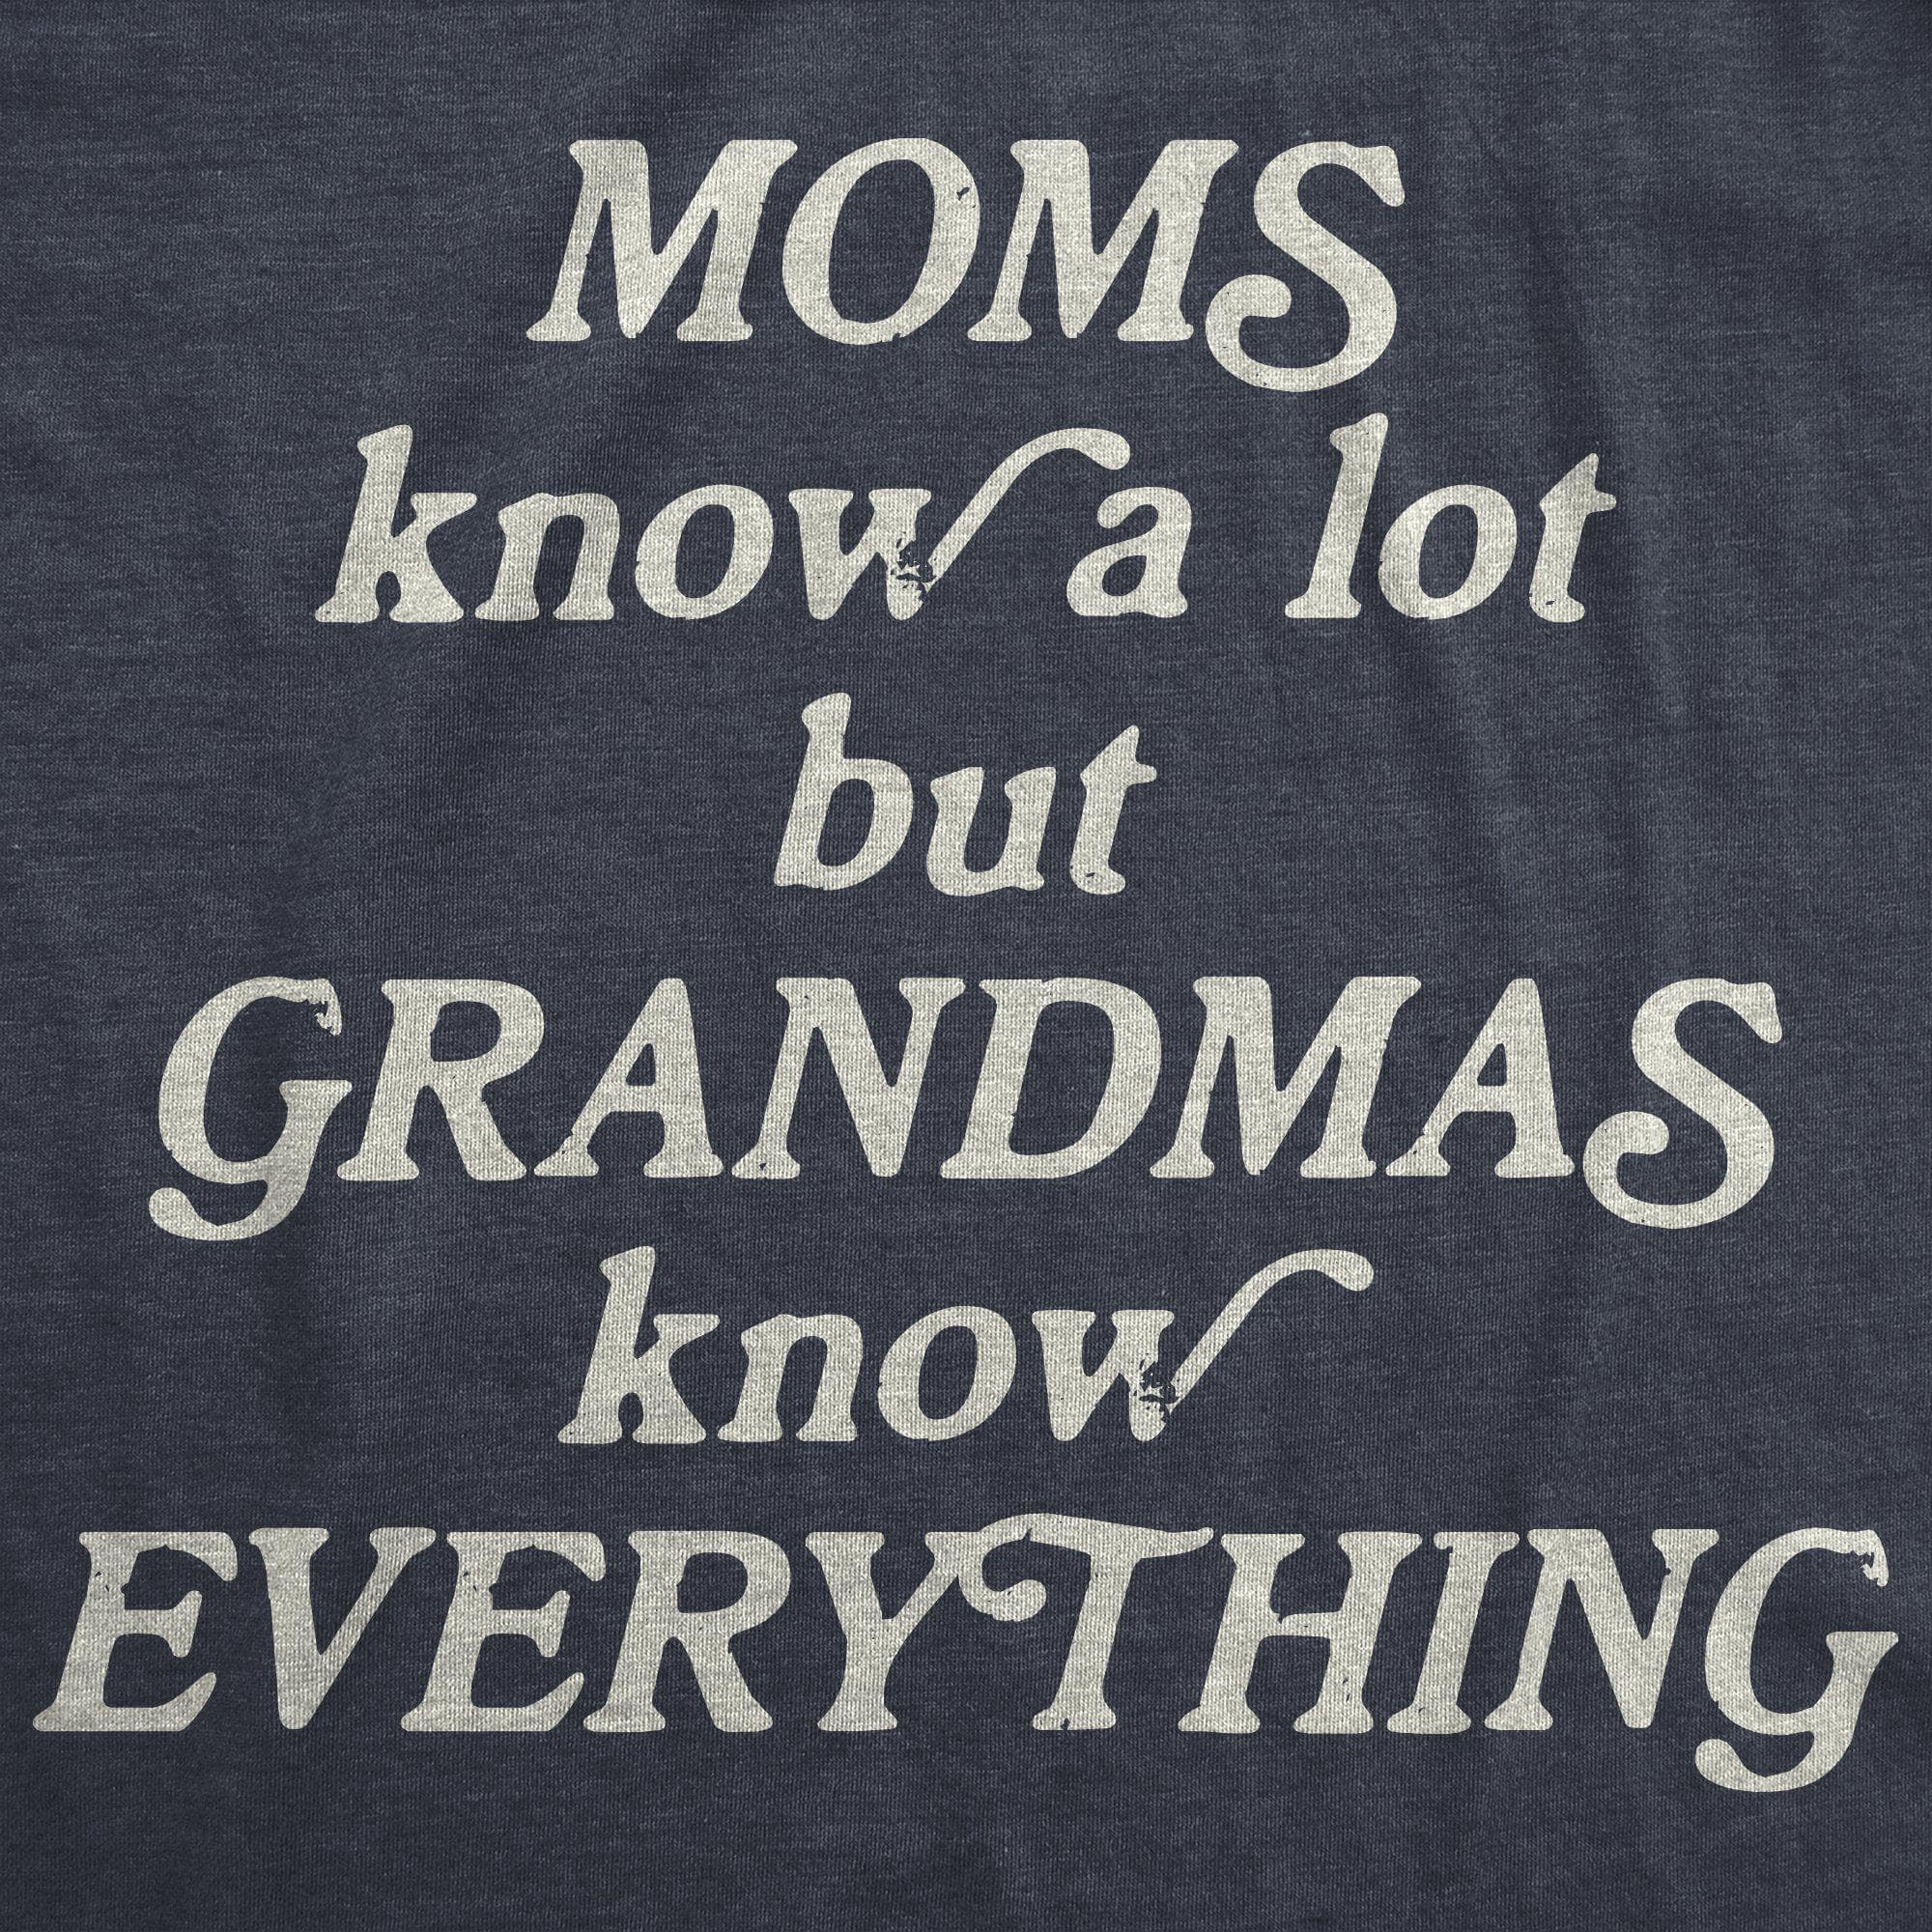 Moms Know A Lot But Grandmas Know Everything Women's Tshirt - Crazy Dog T-Shirts